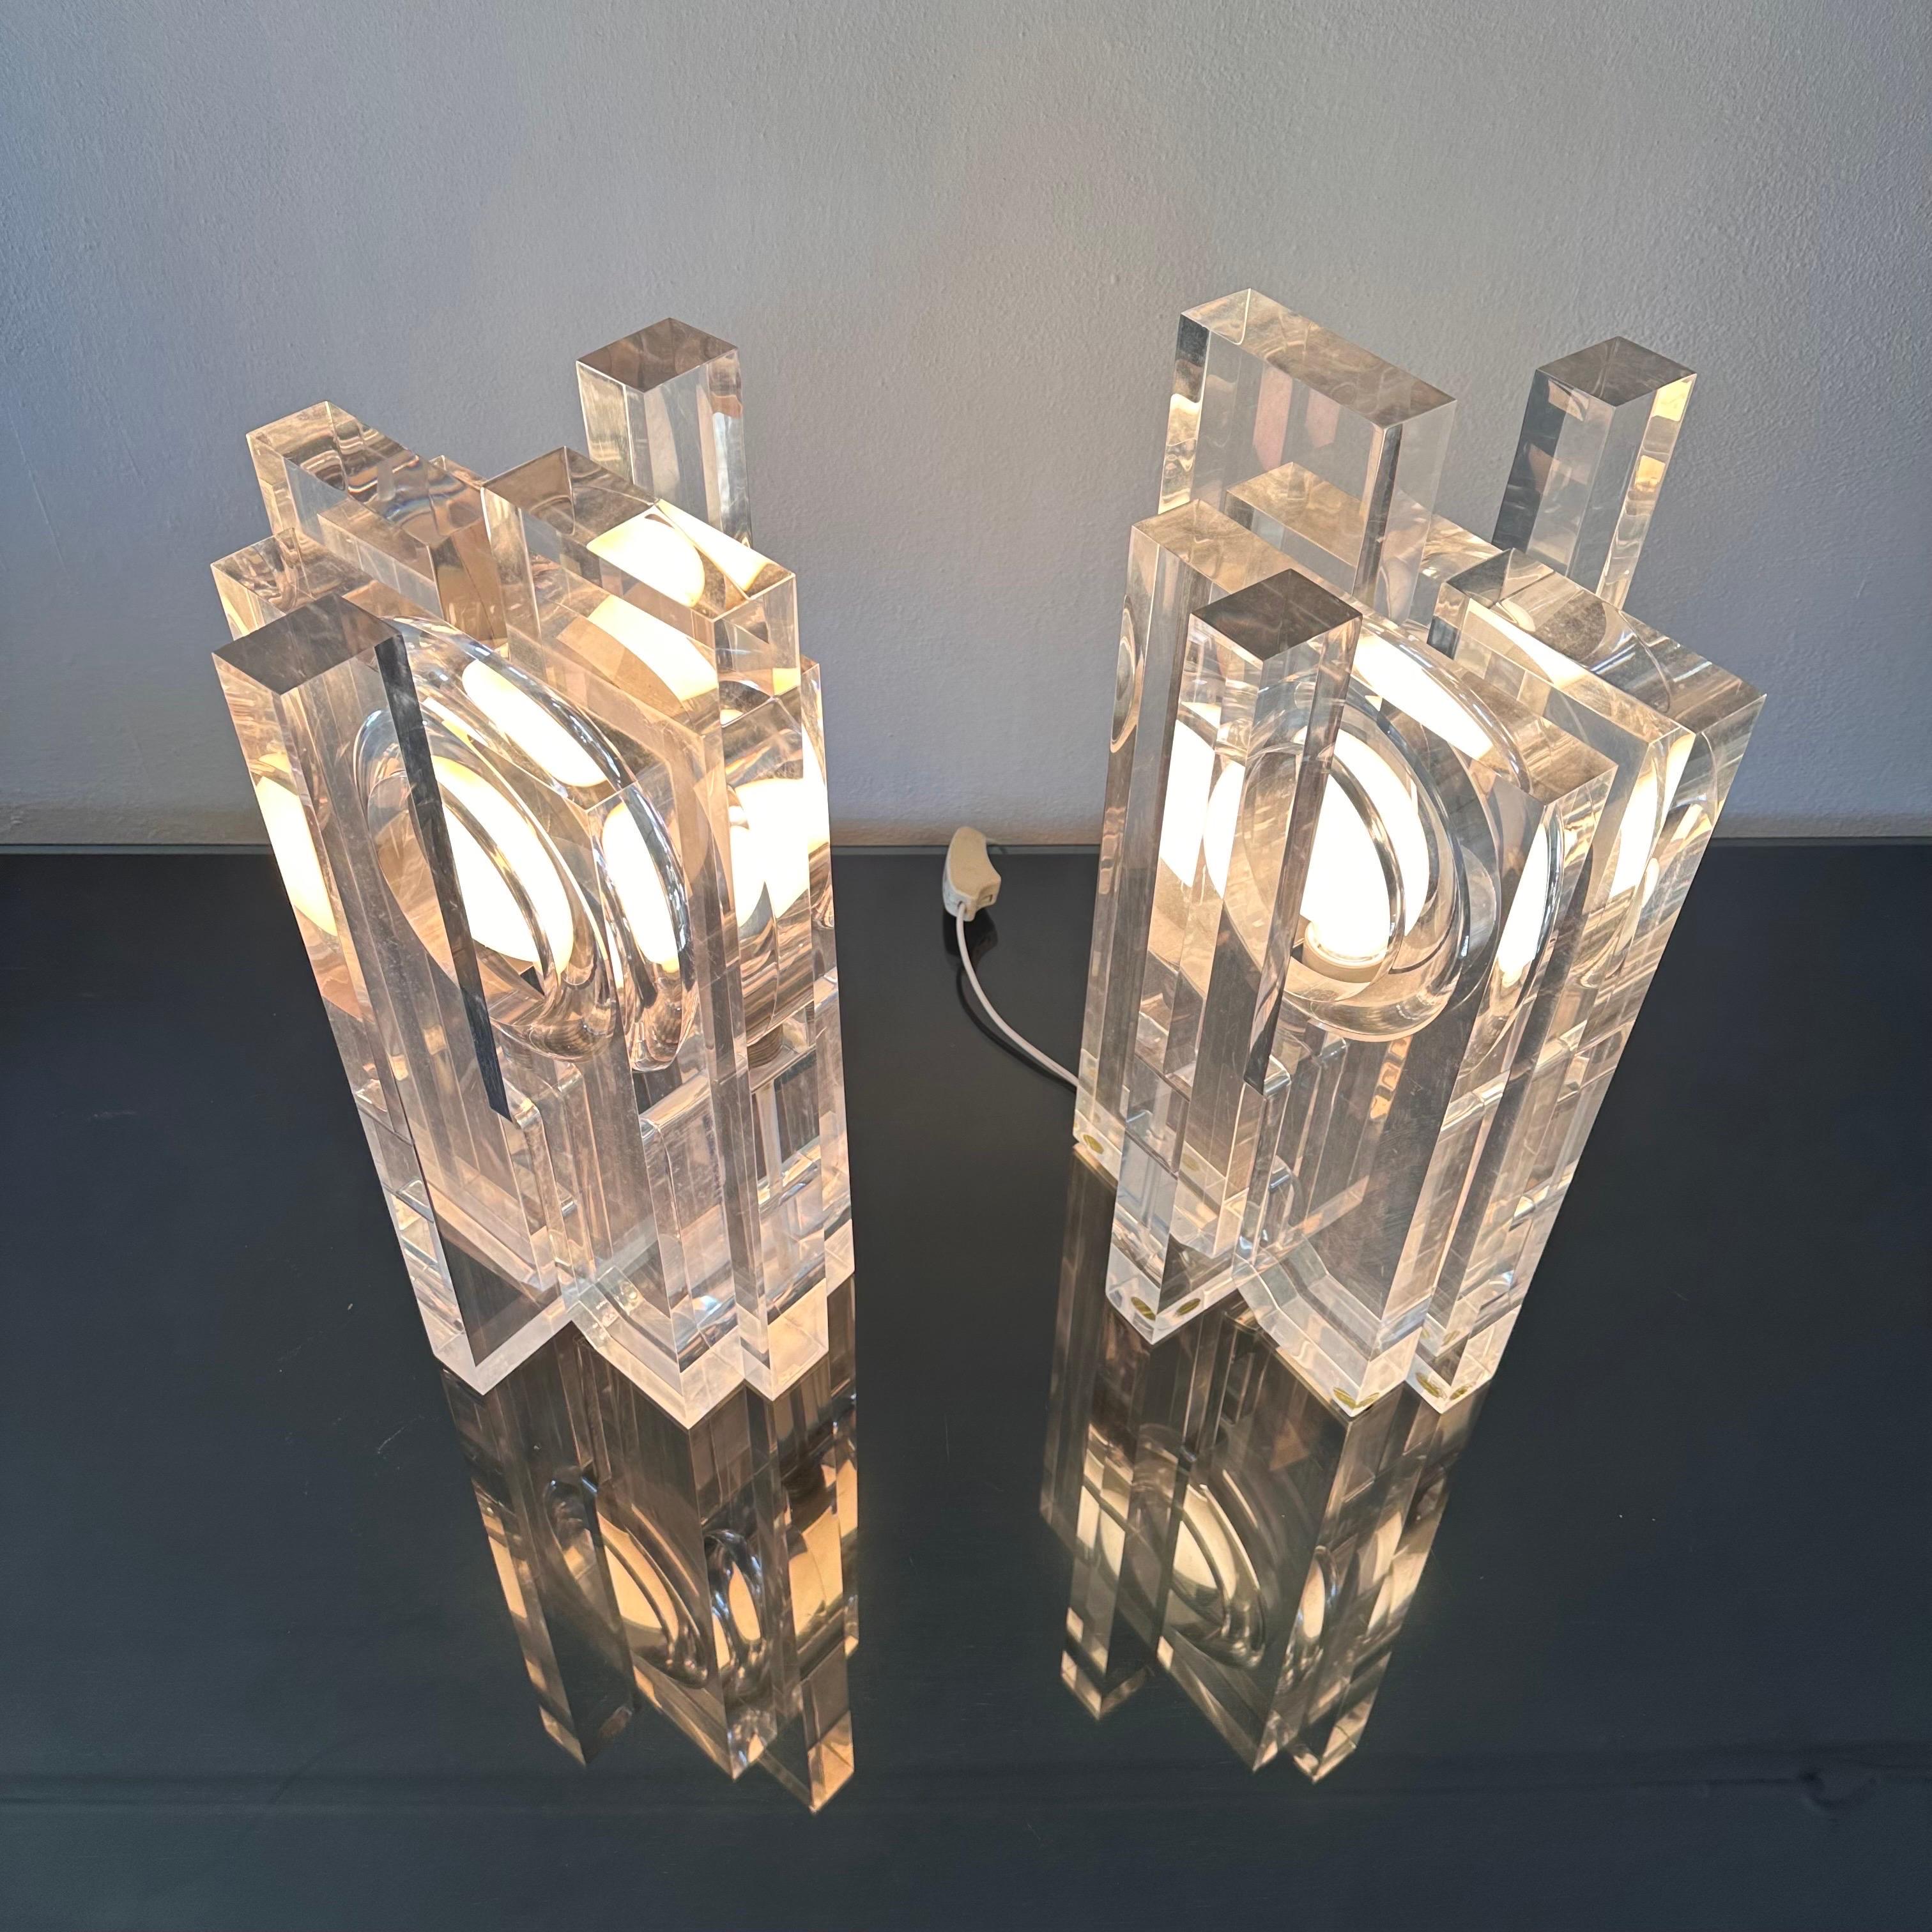 Rare Vintage Sandro Petti Lucite Huge Table Lamps for Metallarte, 1970s For Sale 10